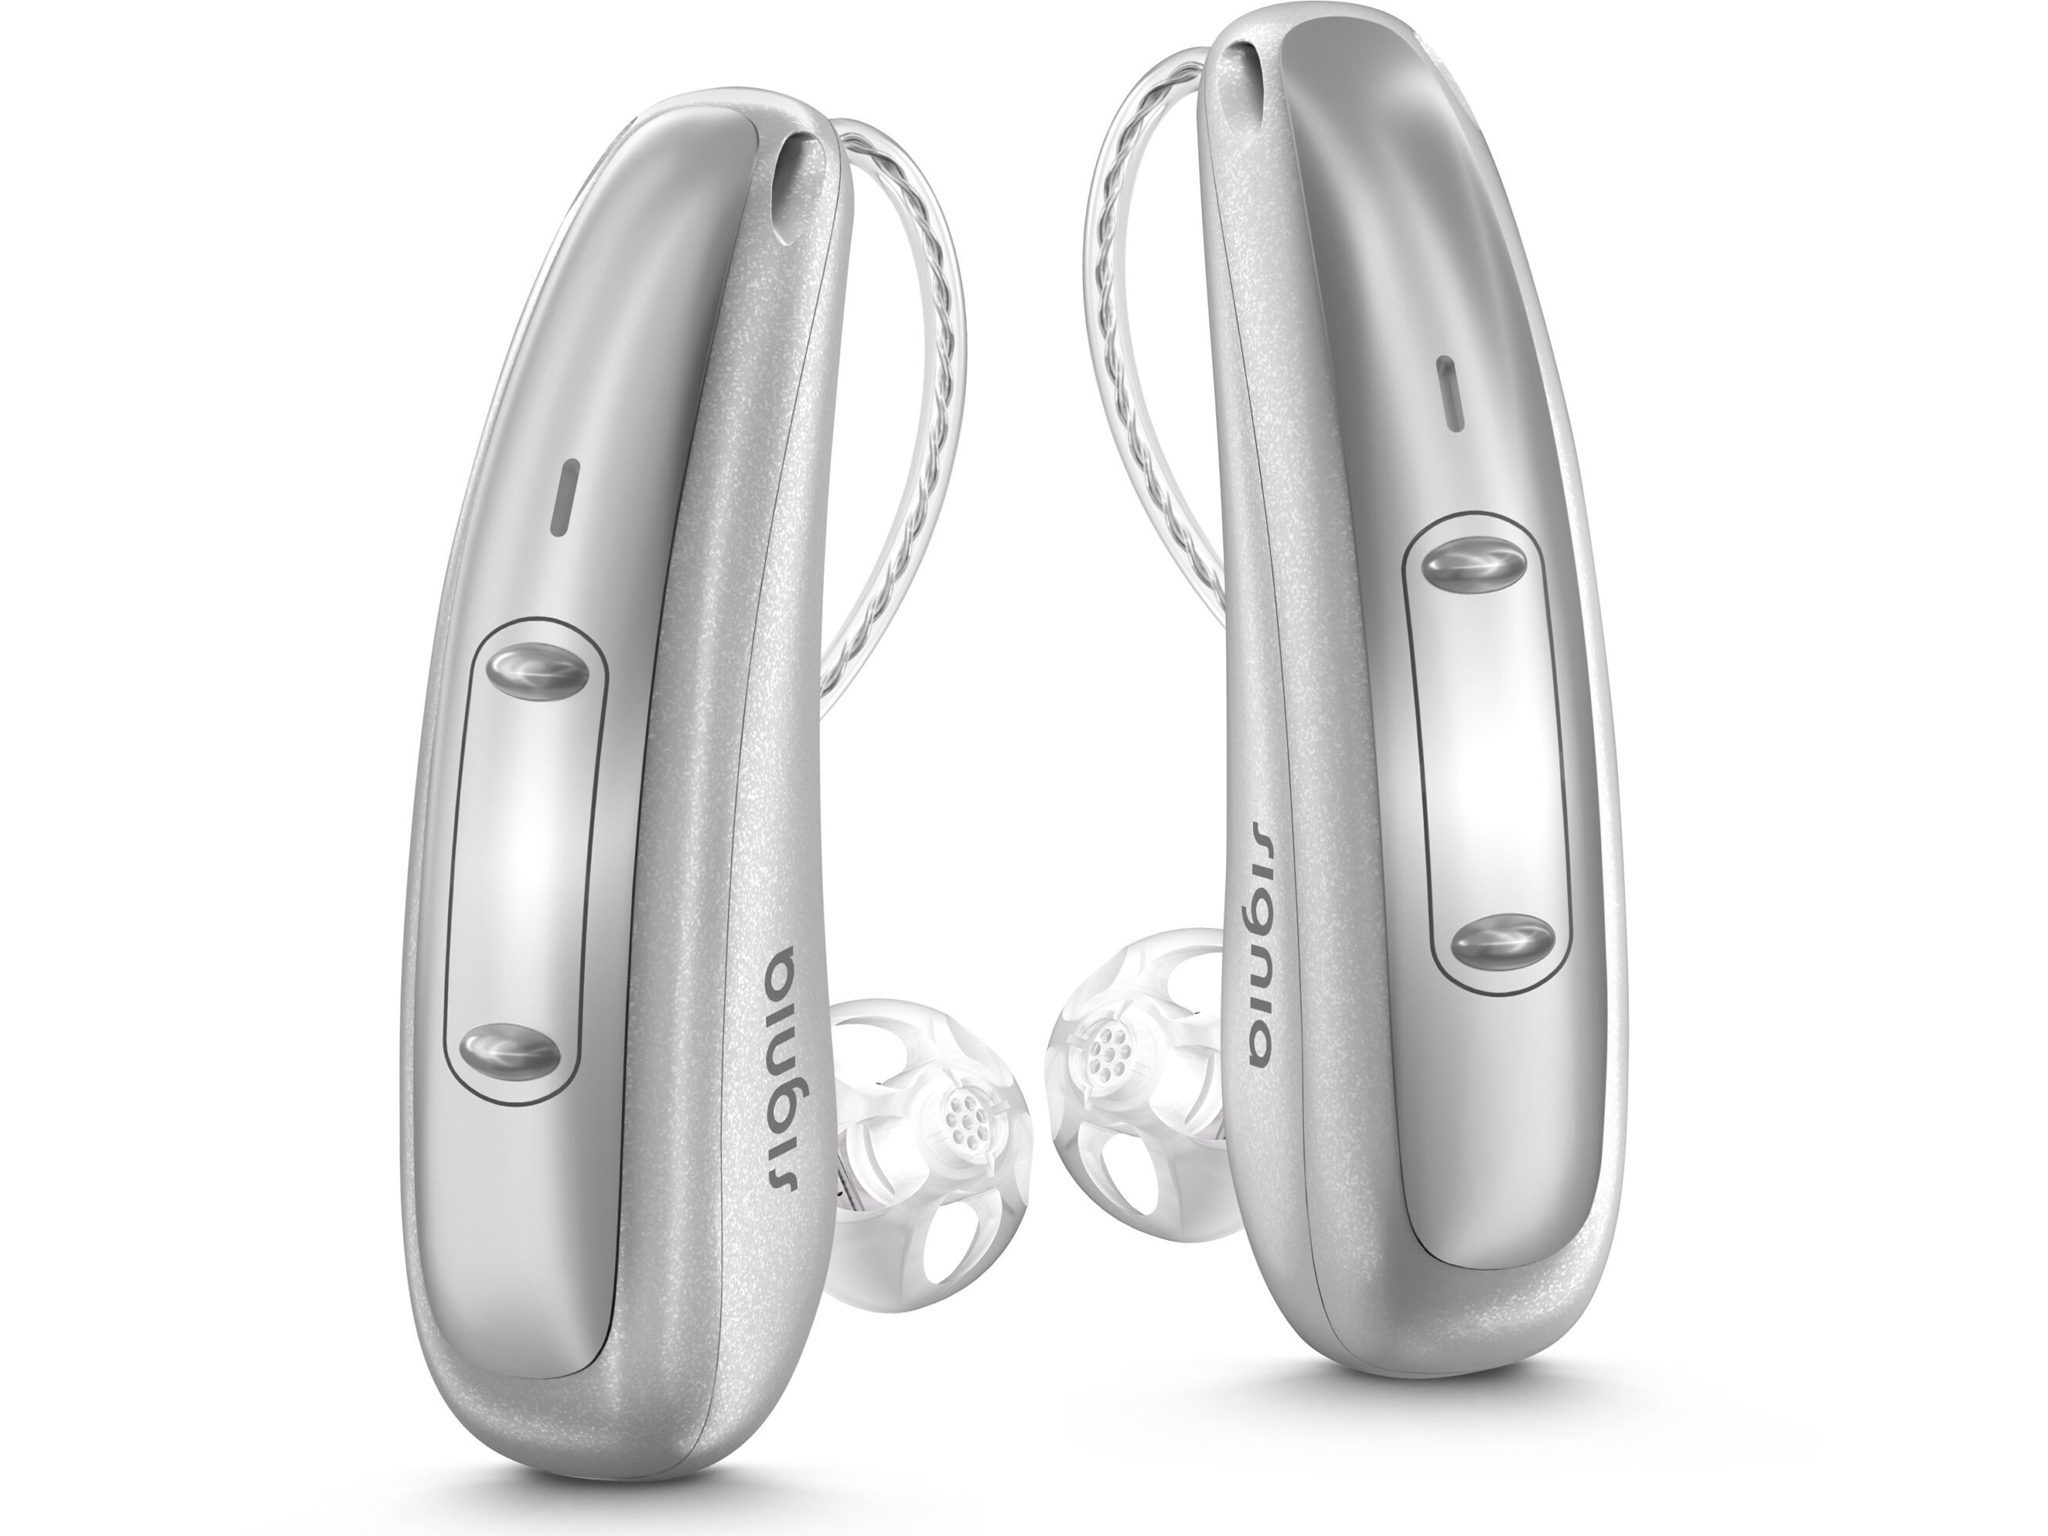 signia hearing aid with protective case